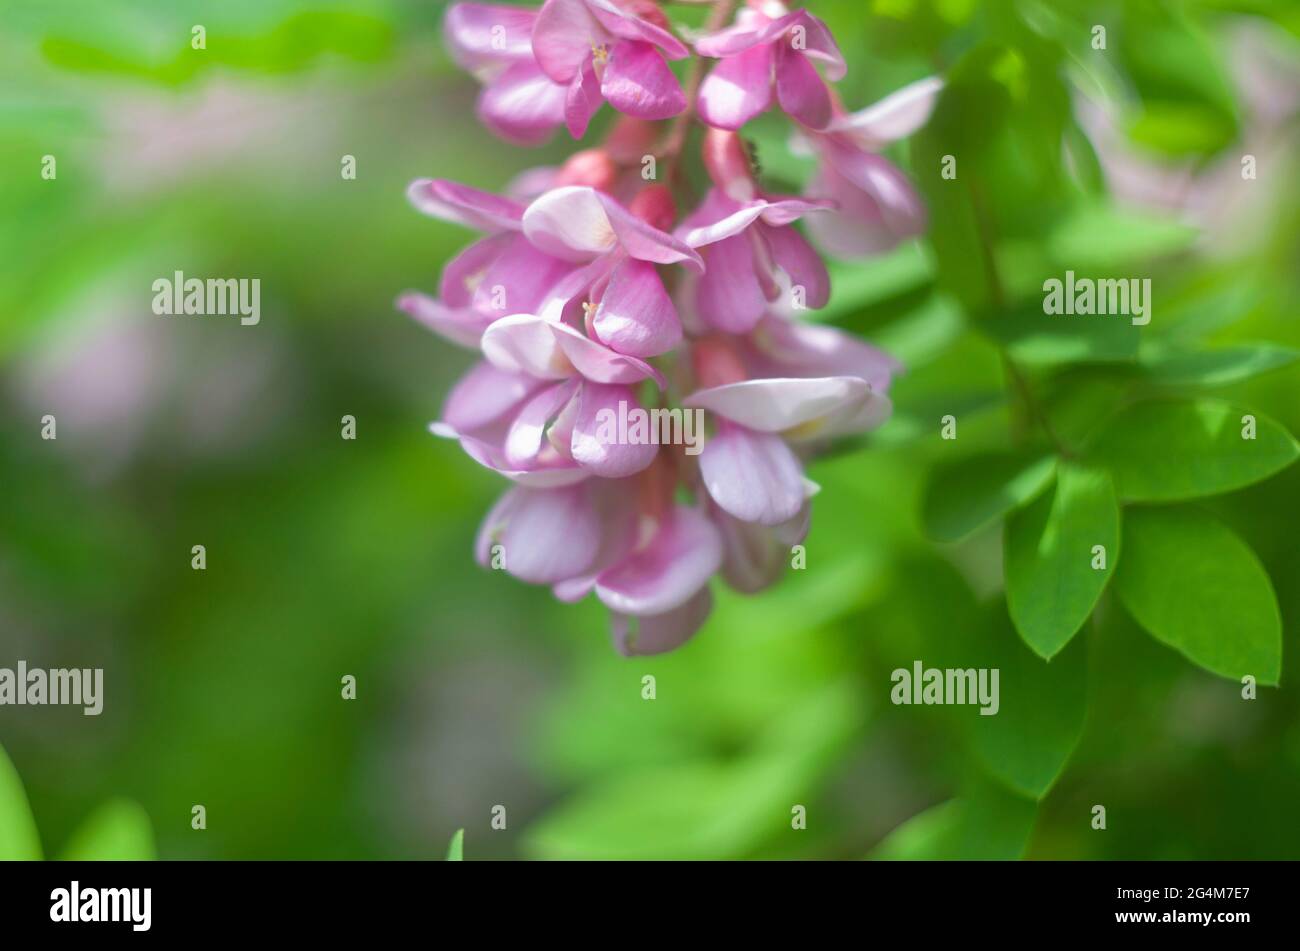 Acacia pink flower bush on a roaring background. Floral summer photo. Stock Photo